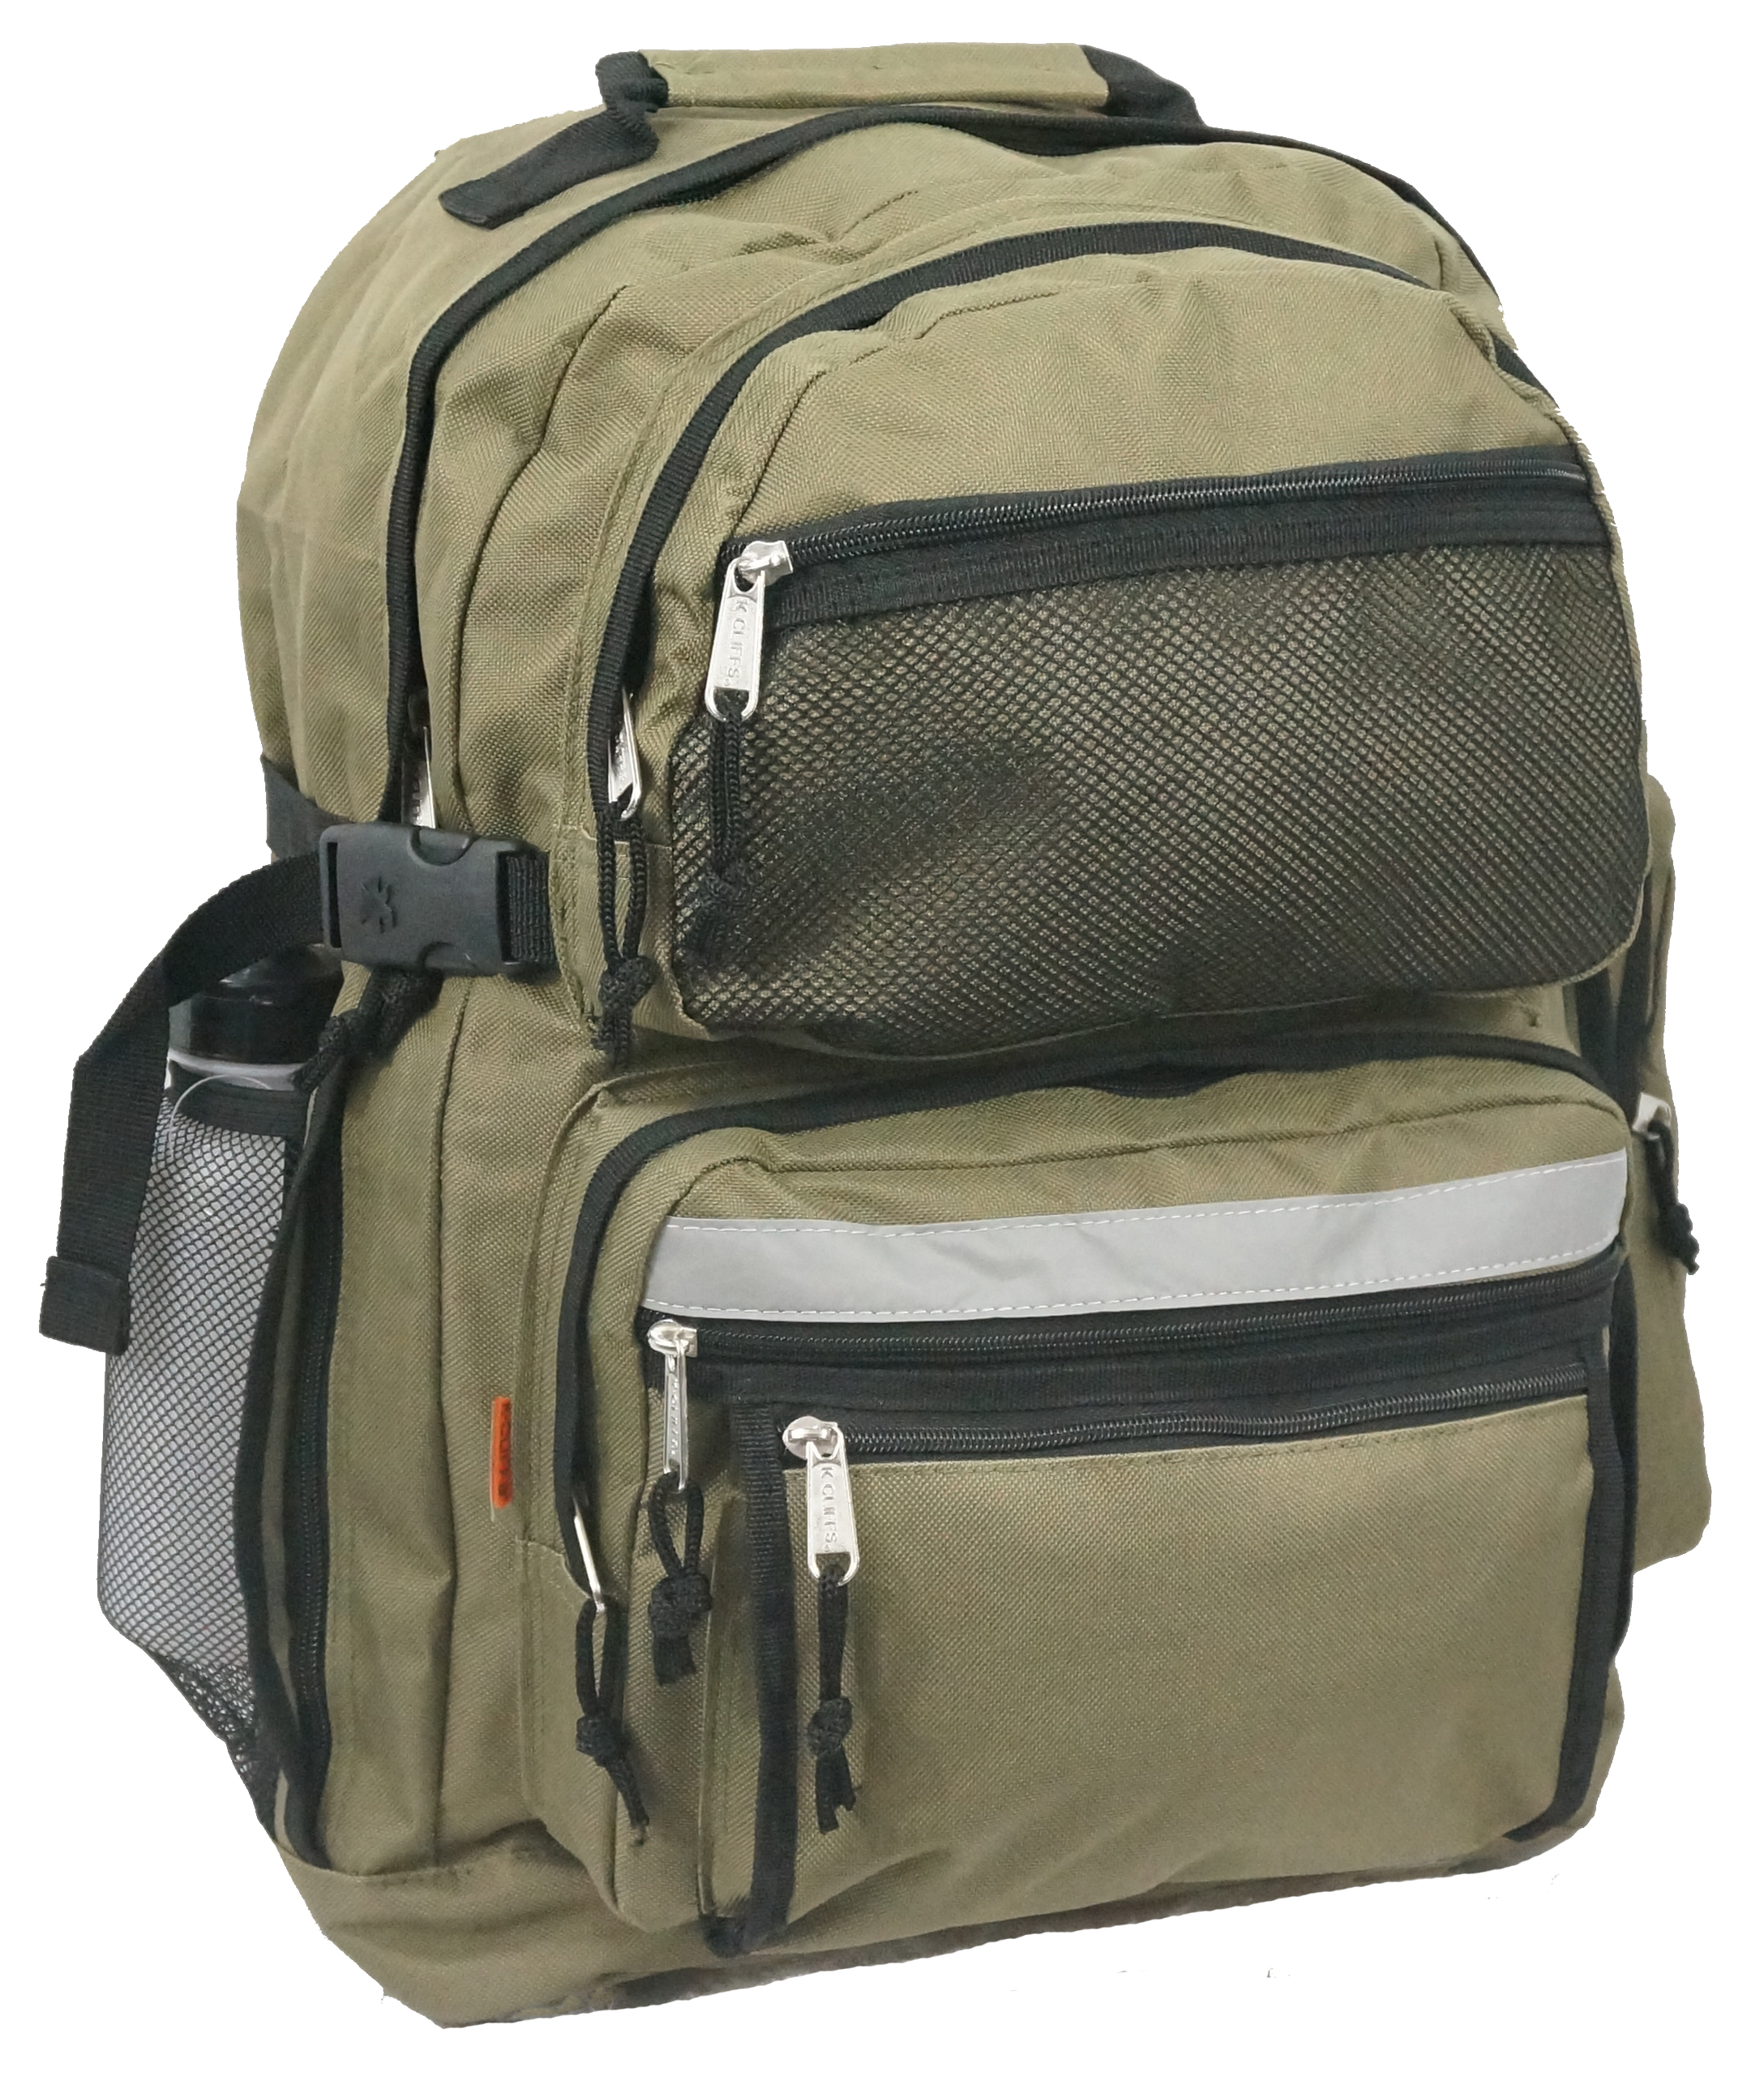 K-Cliffs X Large Green 19" Unisex School Backpack with Safety Reflective Strip and Water Bottle - - image 1 of 4